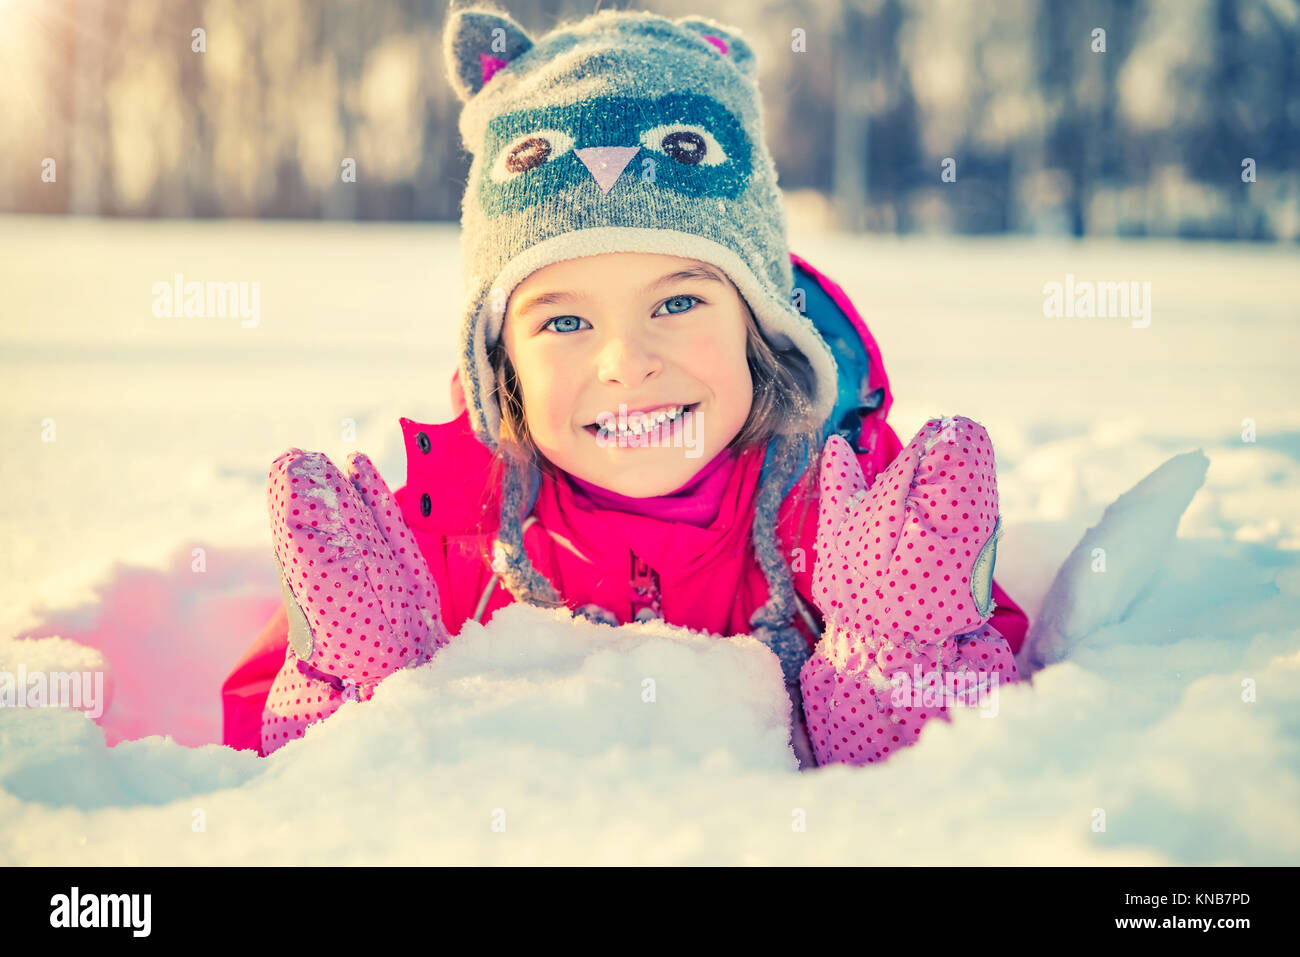 Little girl in a winter park Stock Photo